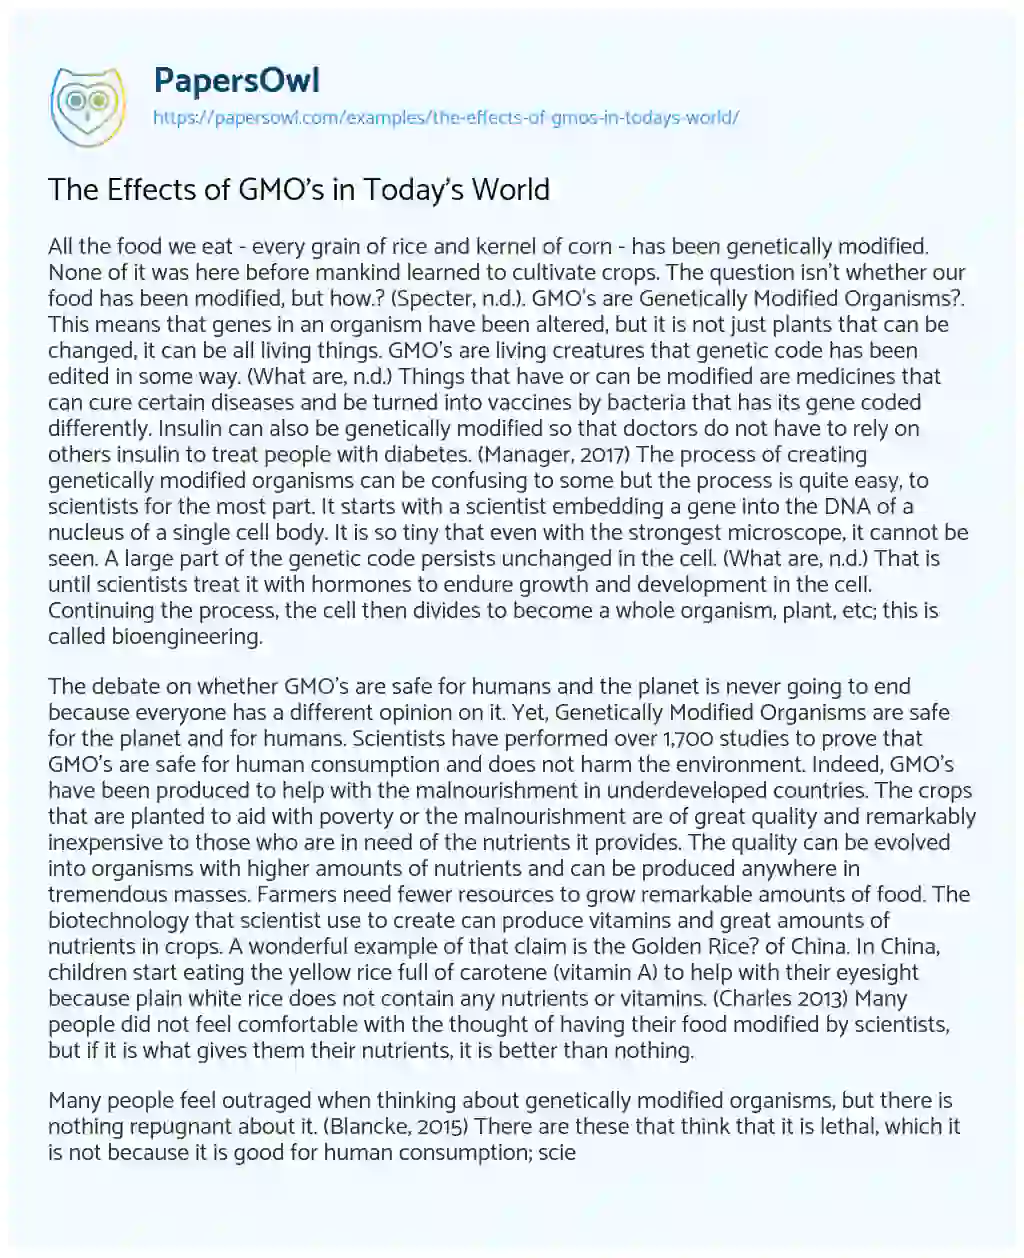 The Effects of GMO’s in Today’s World essay